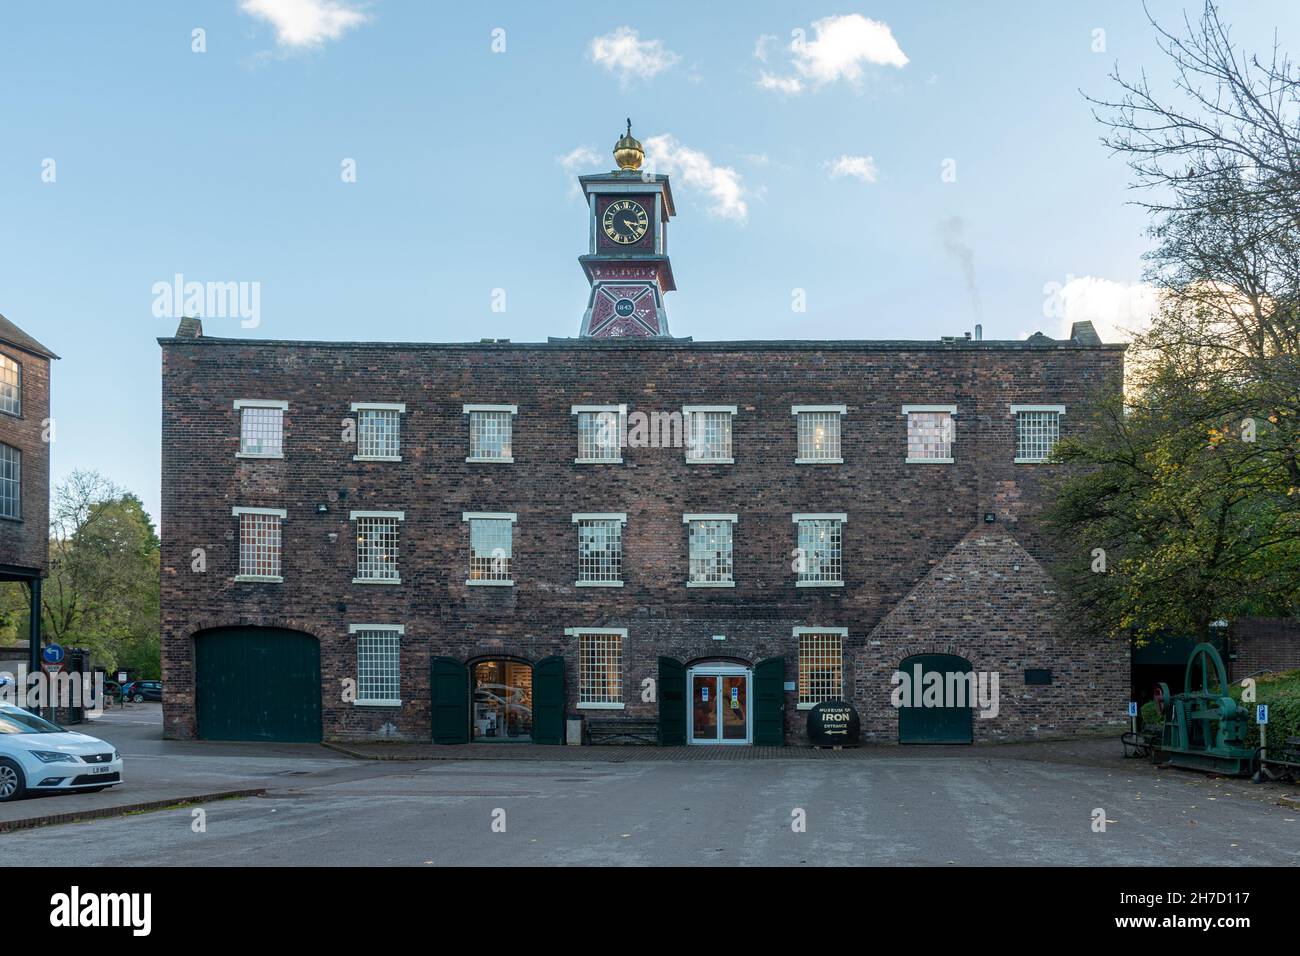 The Coalbrookdale Museum of Iron, a visitor attraction in Ironbridge Gorge, Shropshire, England, UK Stock Photo